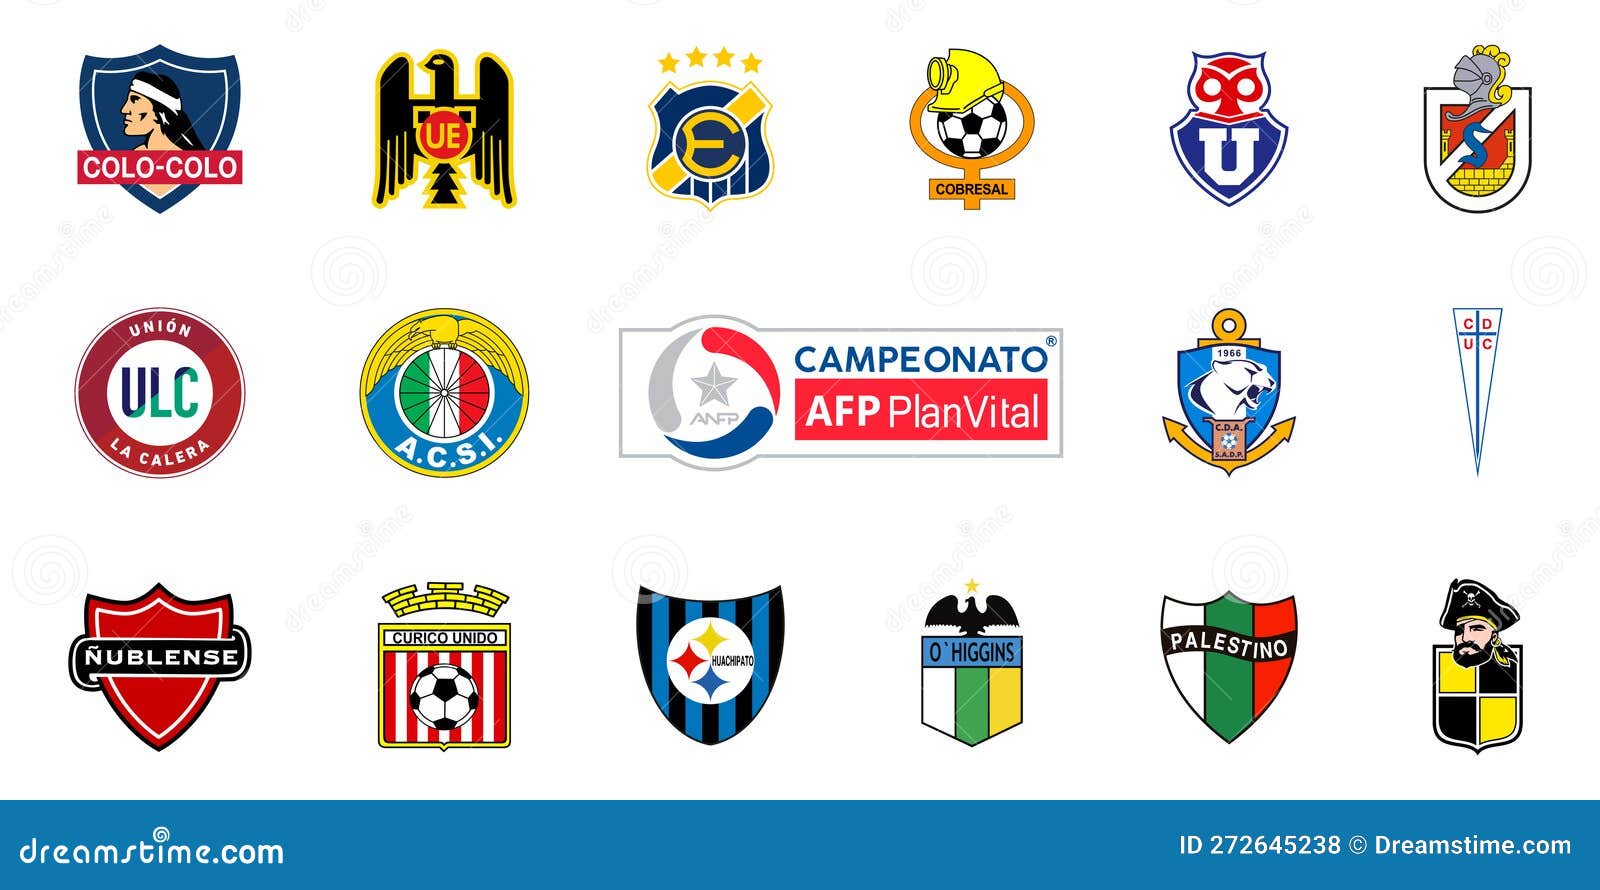 Campeonato Images  Photos, videos, logos, illustrations and